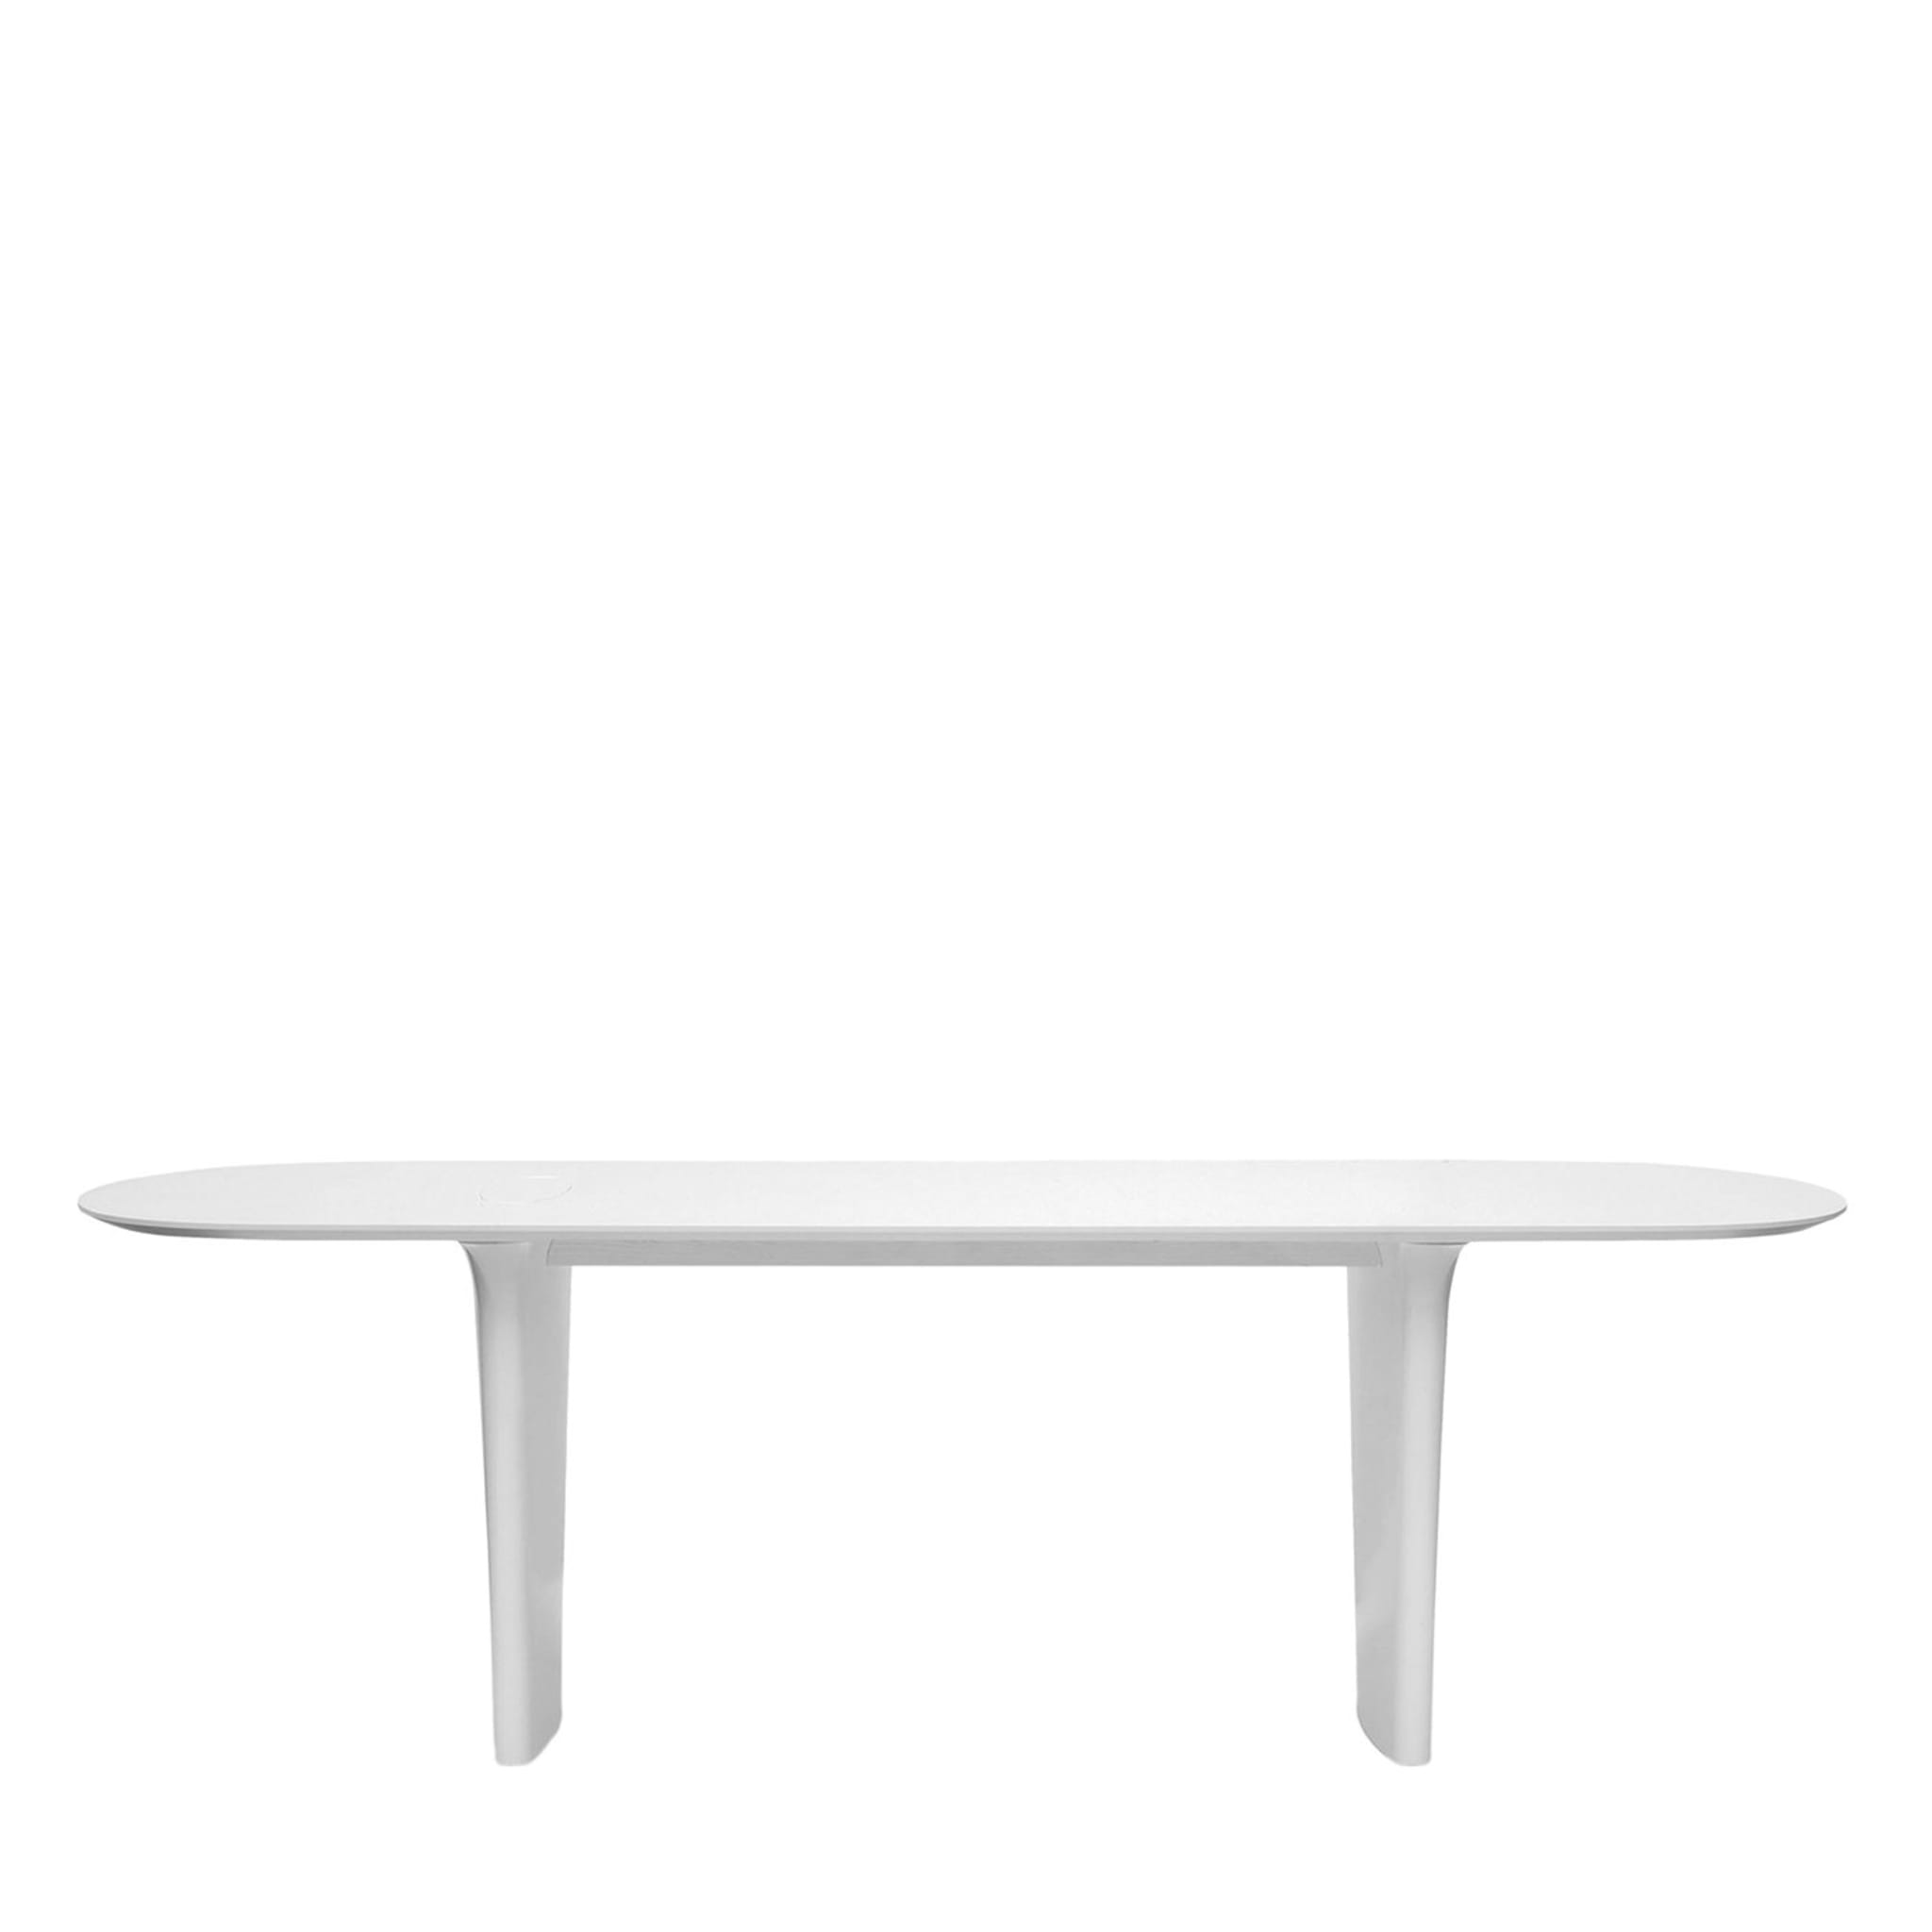 Shift White Desk by Foster + Partners - Main view